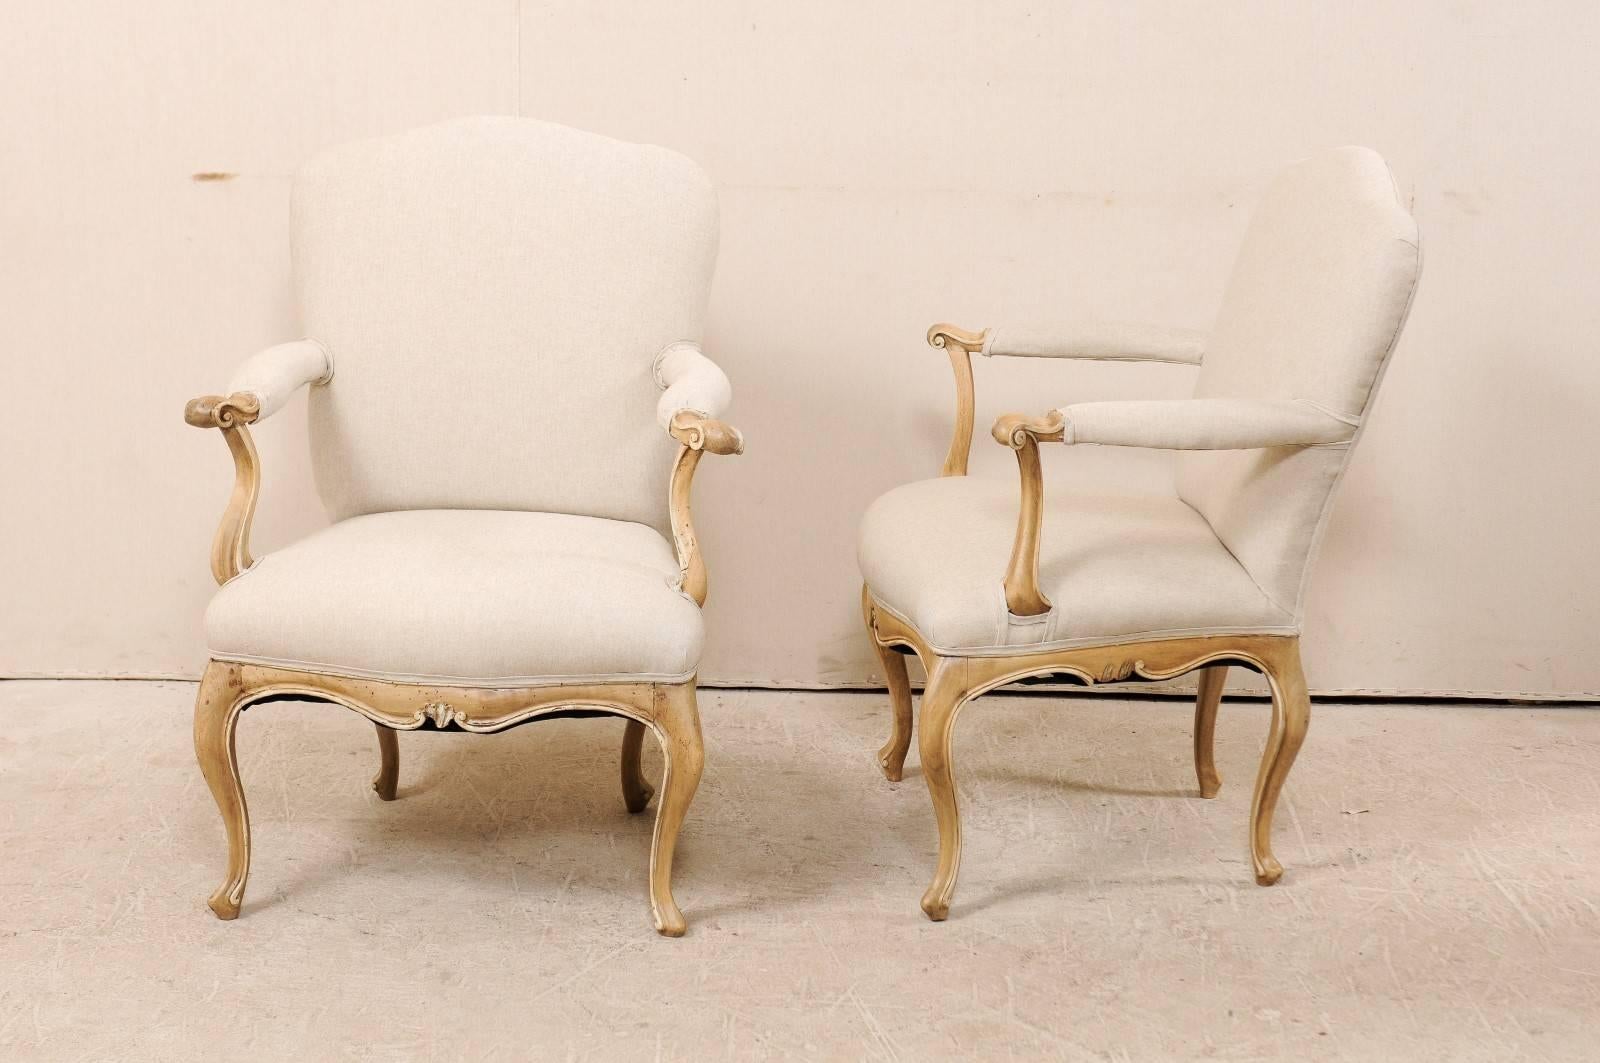 Pair of Lovely 19th Century Italian Upholstered Armchairs with Cabriole Legs For Sale 4